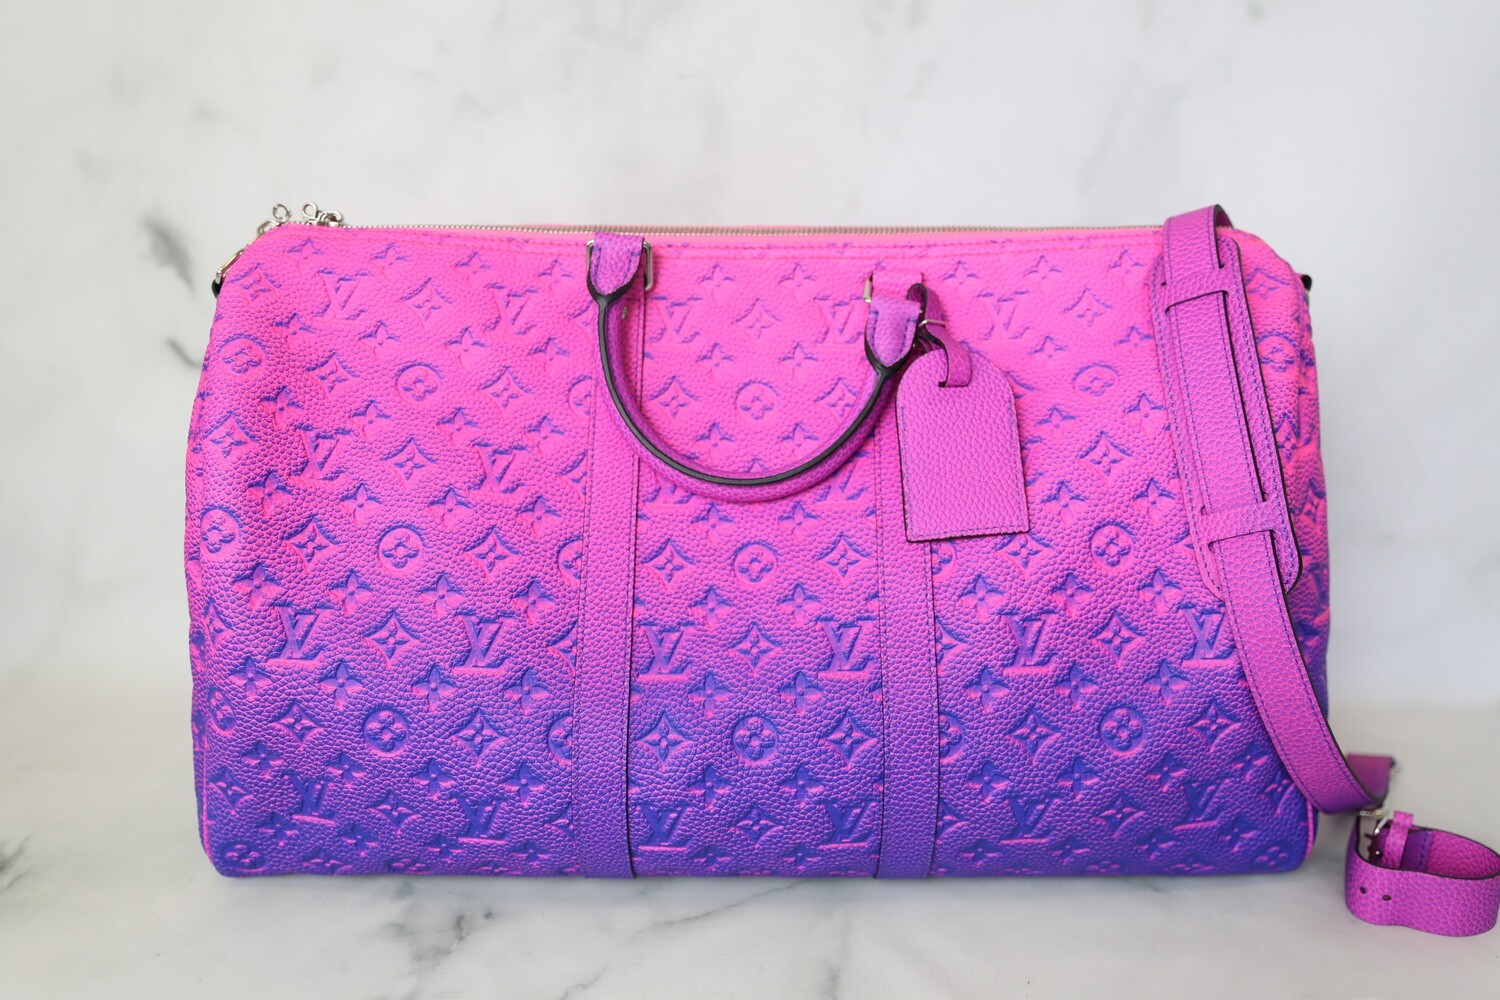 Louis Vuitton Keepall 50B Illusion Collection, Pink and Blue Sunset  Empreinte Leather with Silver Hardware, New in Box WA001